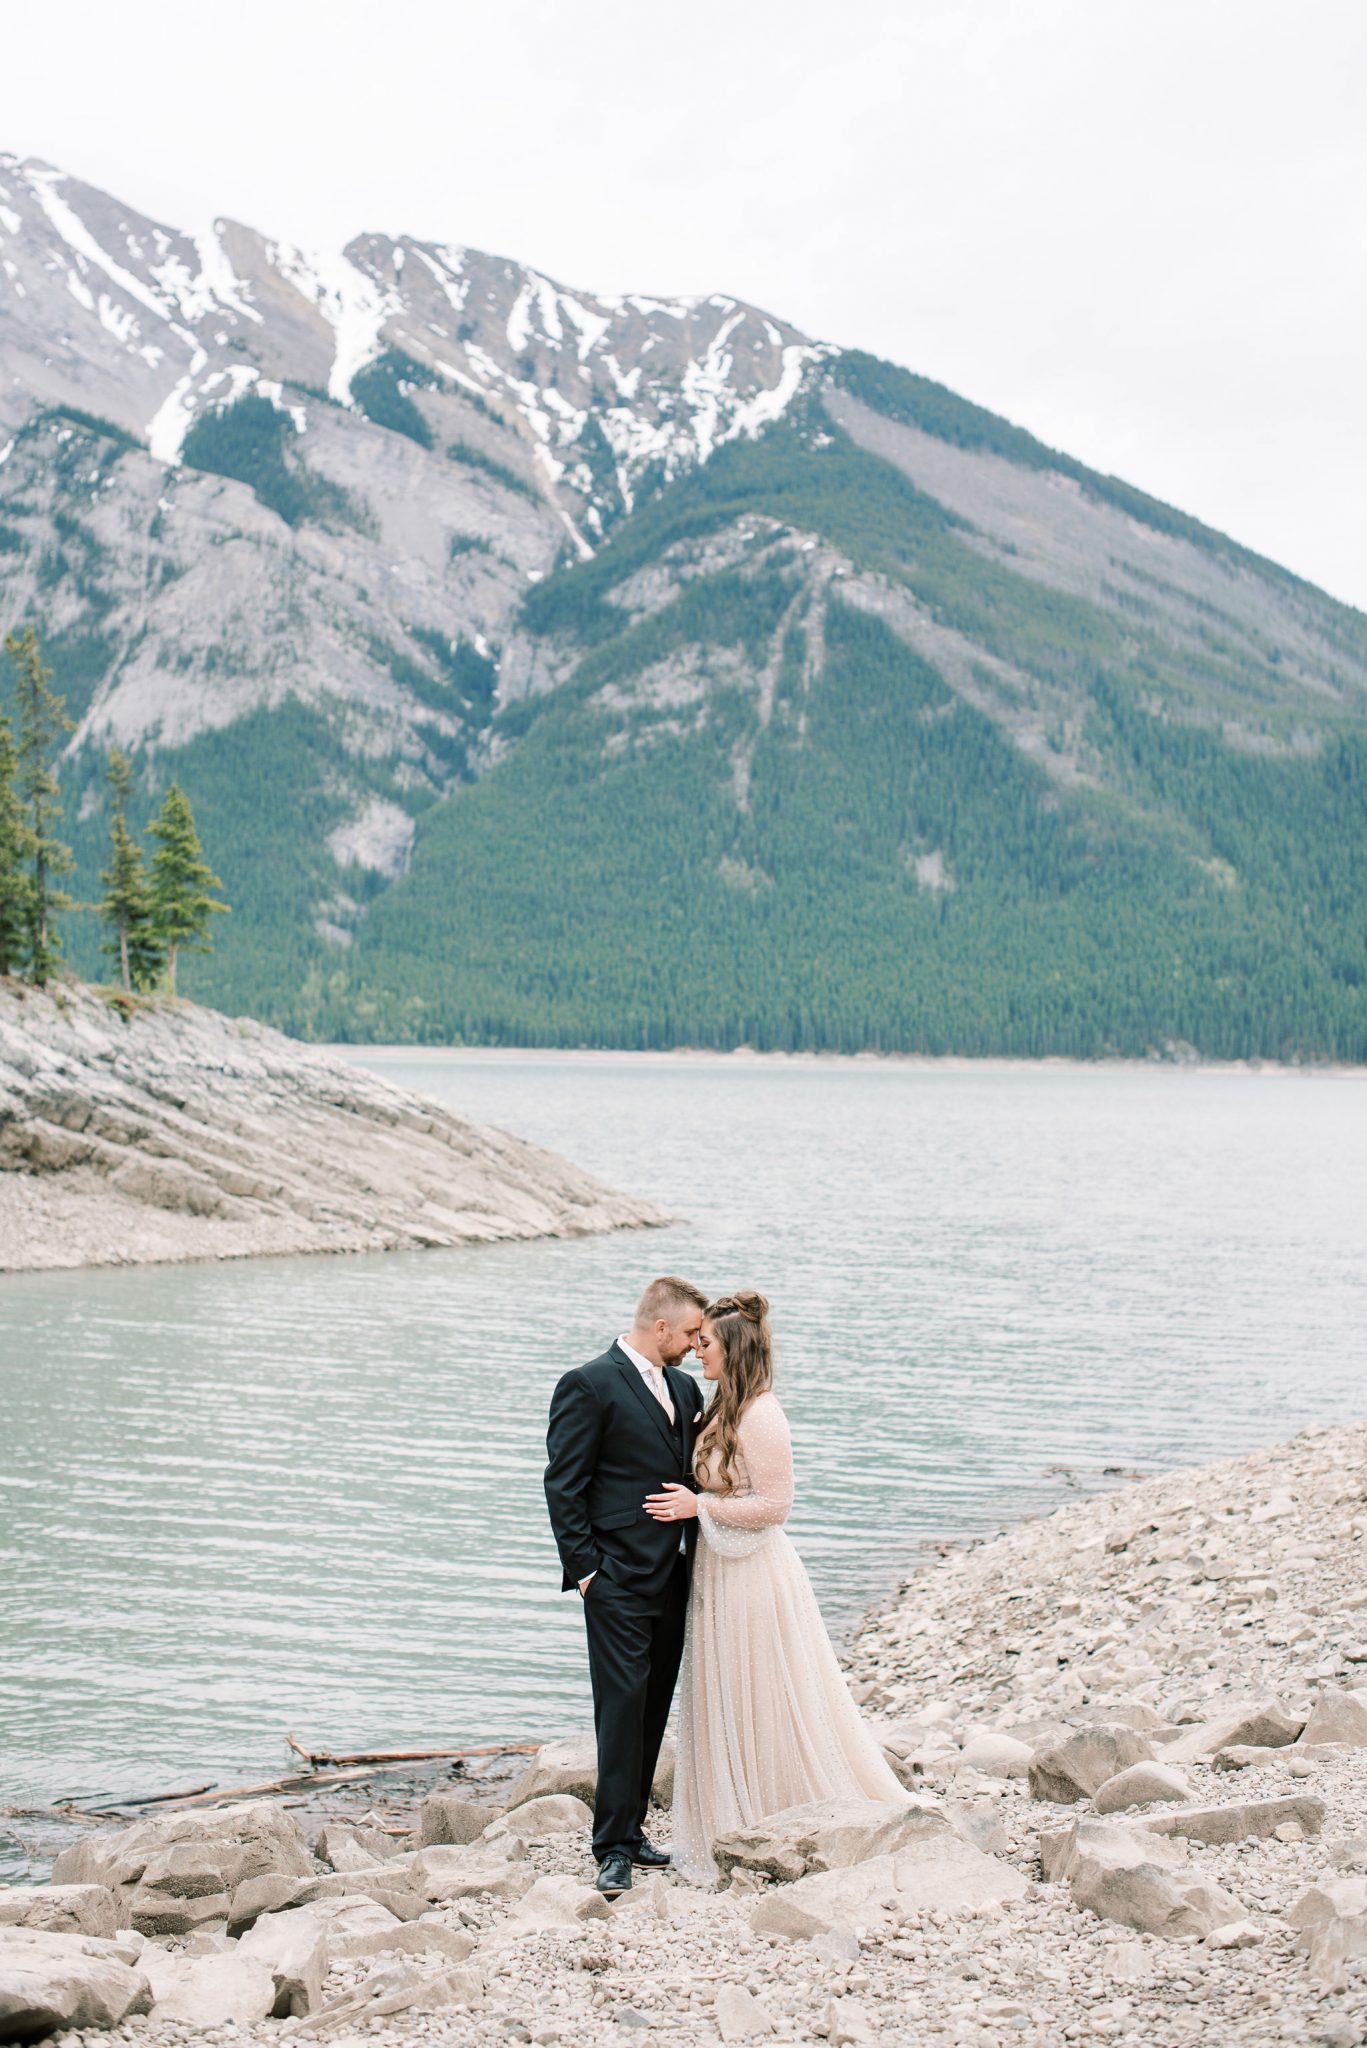 Bride and groom pose on the rocky shore of Lake Minnewanka